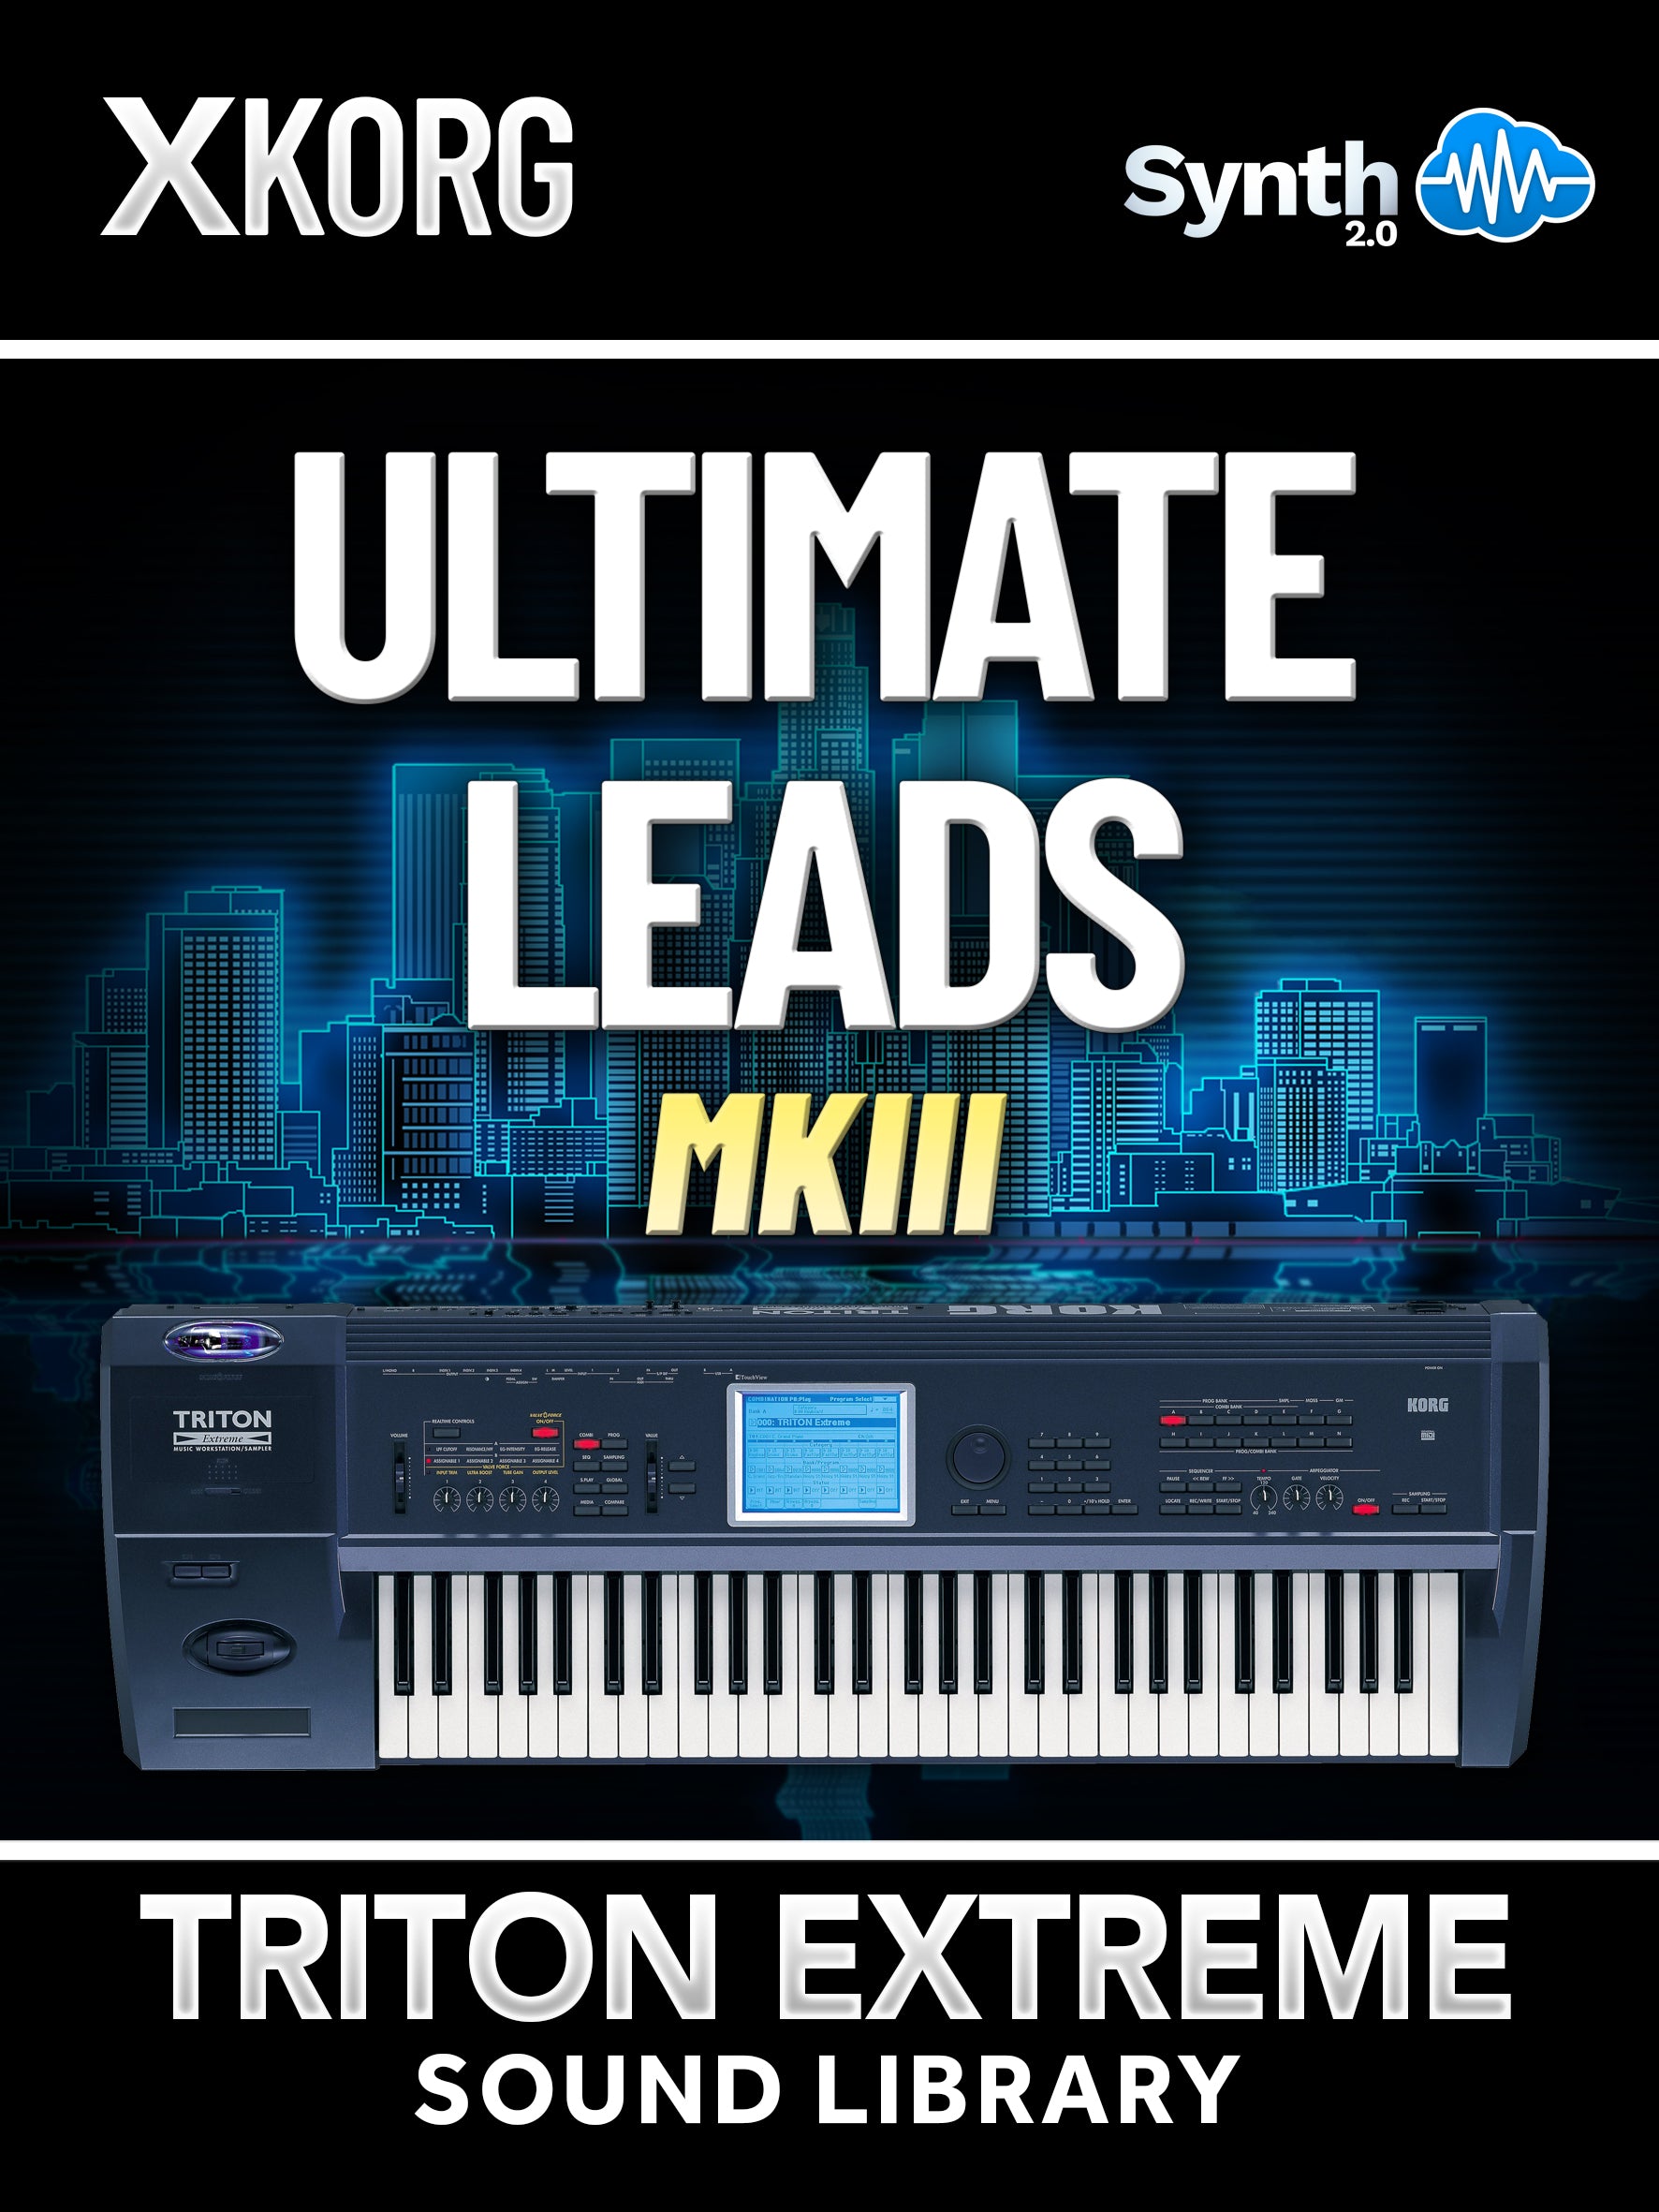 SSX102 - Ultimate Leads MKIII - Korg Triton EXTREME ( 55 presets )